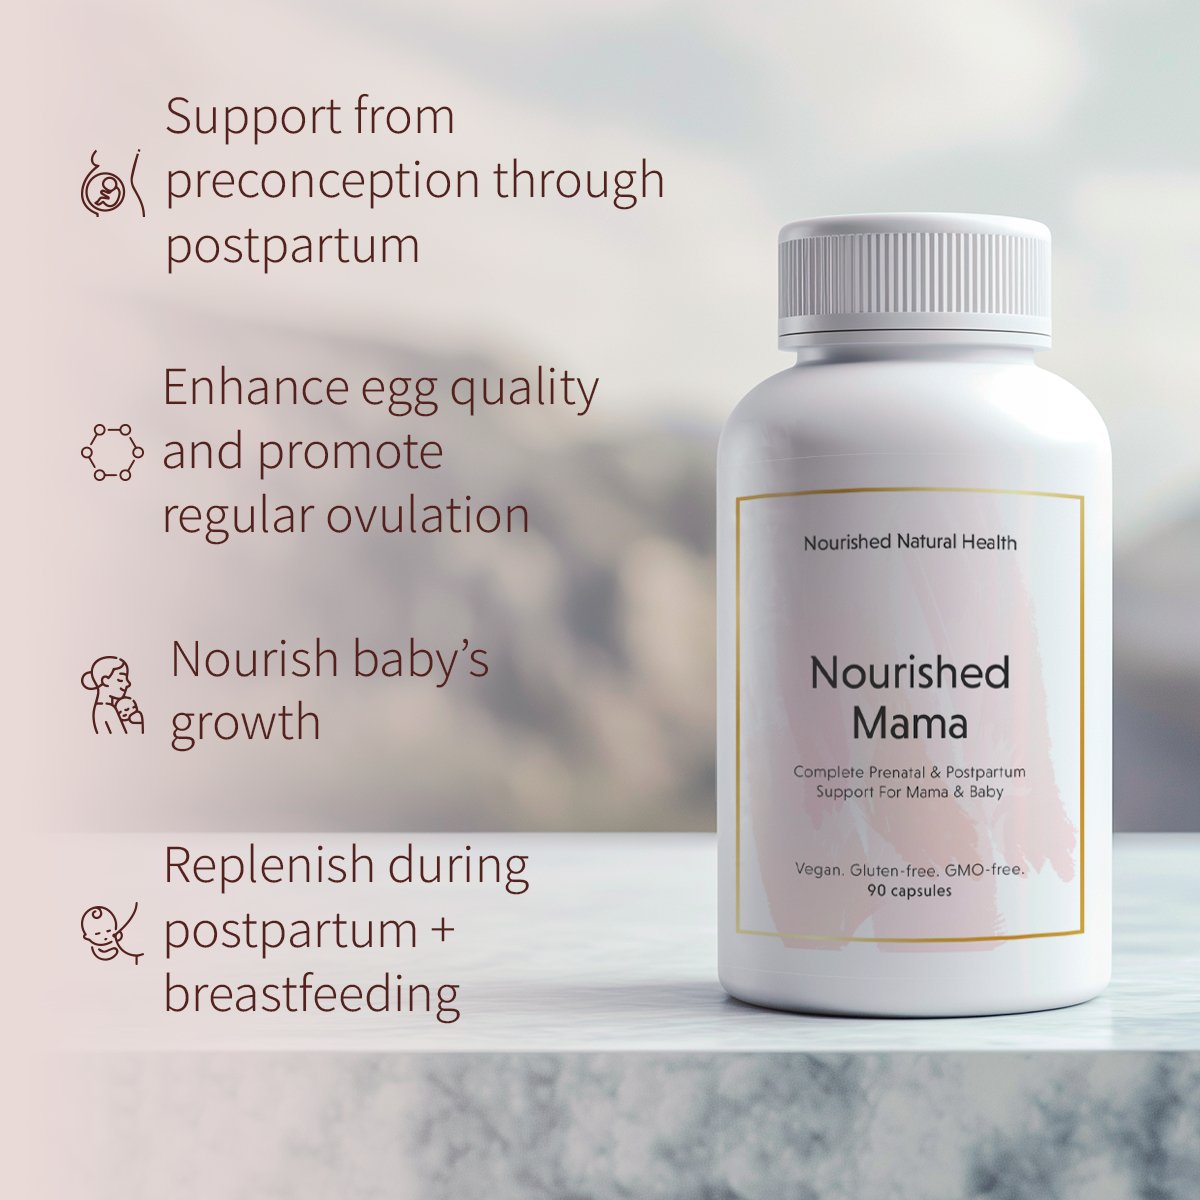 Nourished Mama - Complete Prenatal & Postpartum Support For Mama & Baby - Nourished Natural Health